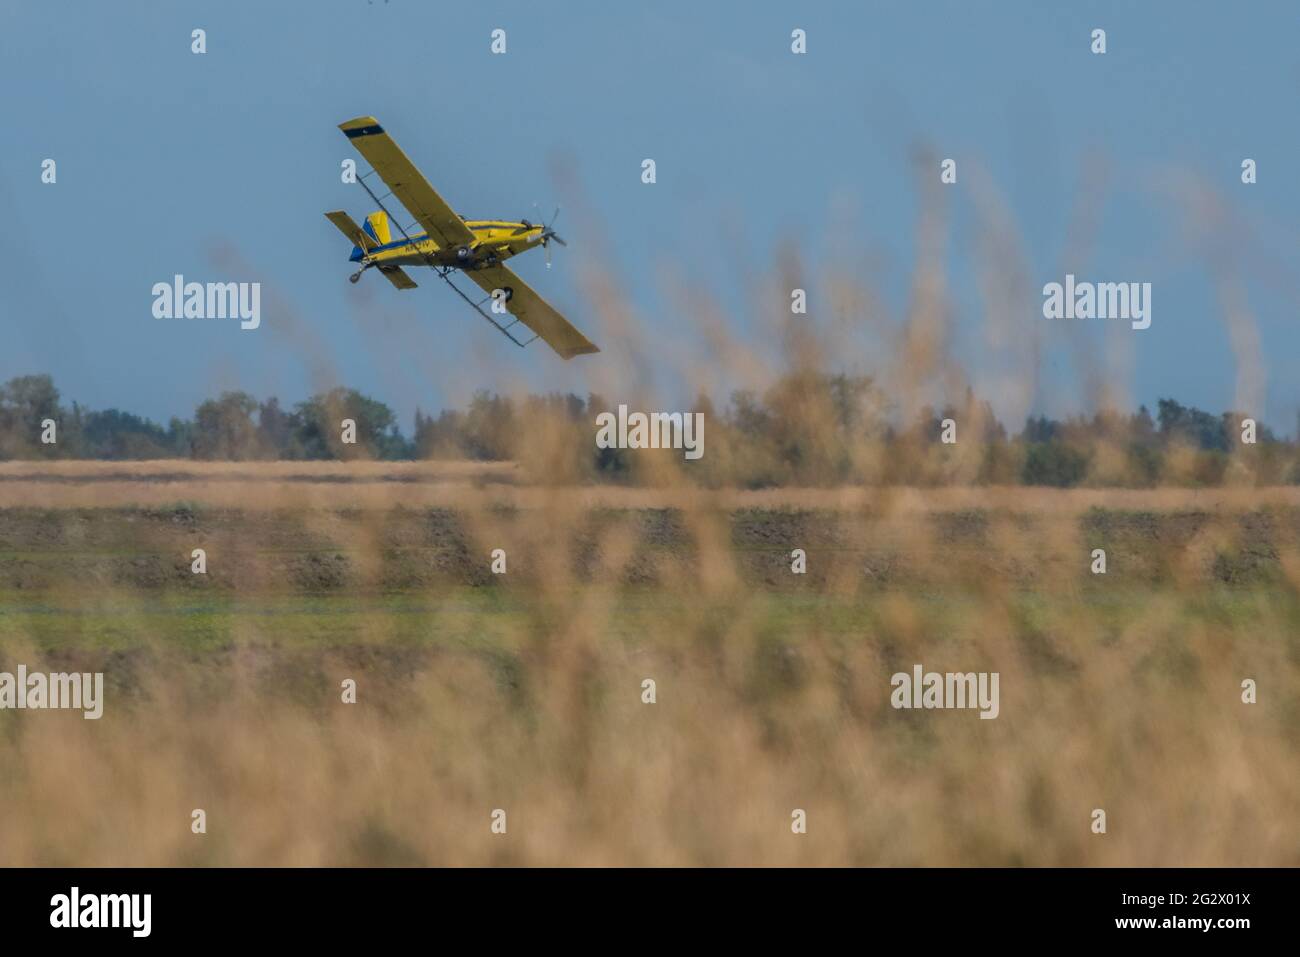 A small plane flies over rice paddies dropping rice seed near Sacramento in the central valley of California, USA. Stock Photo